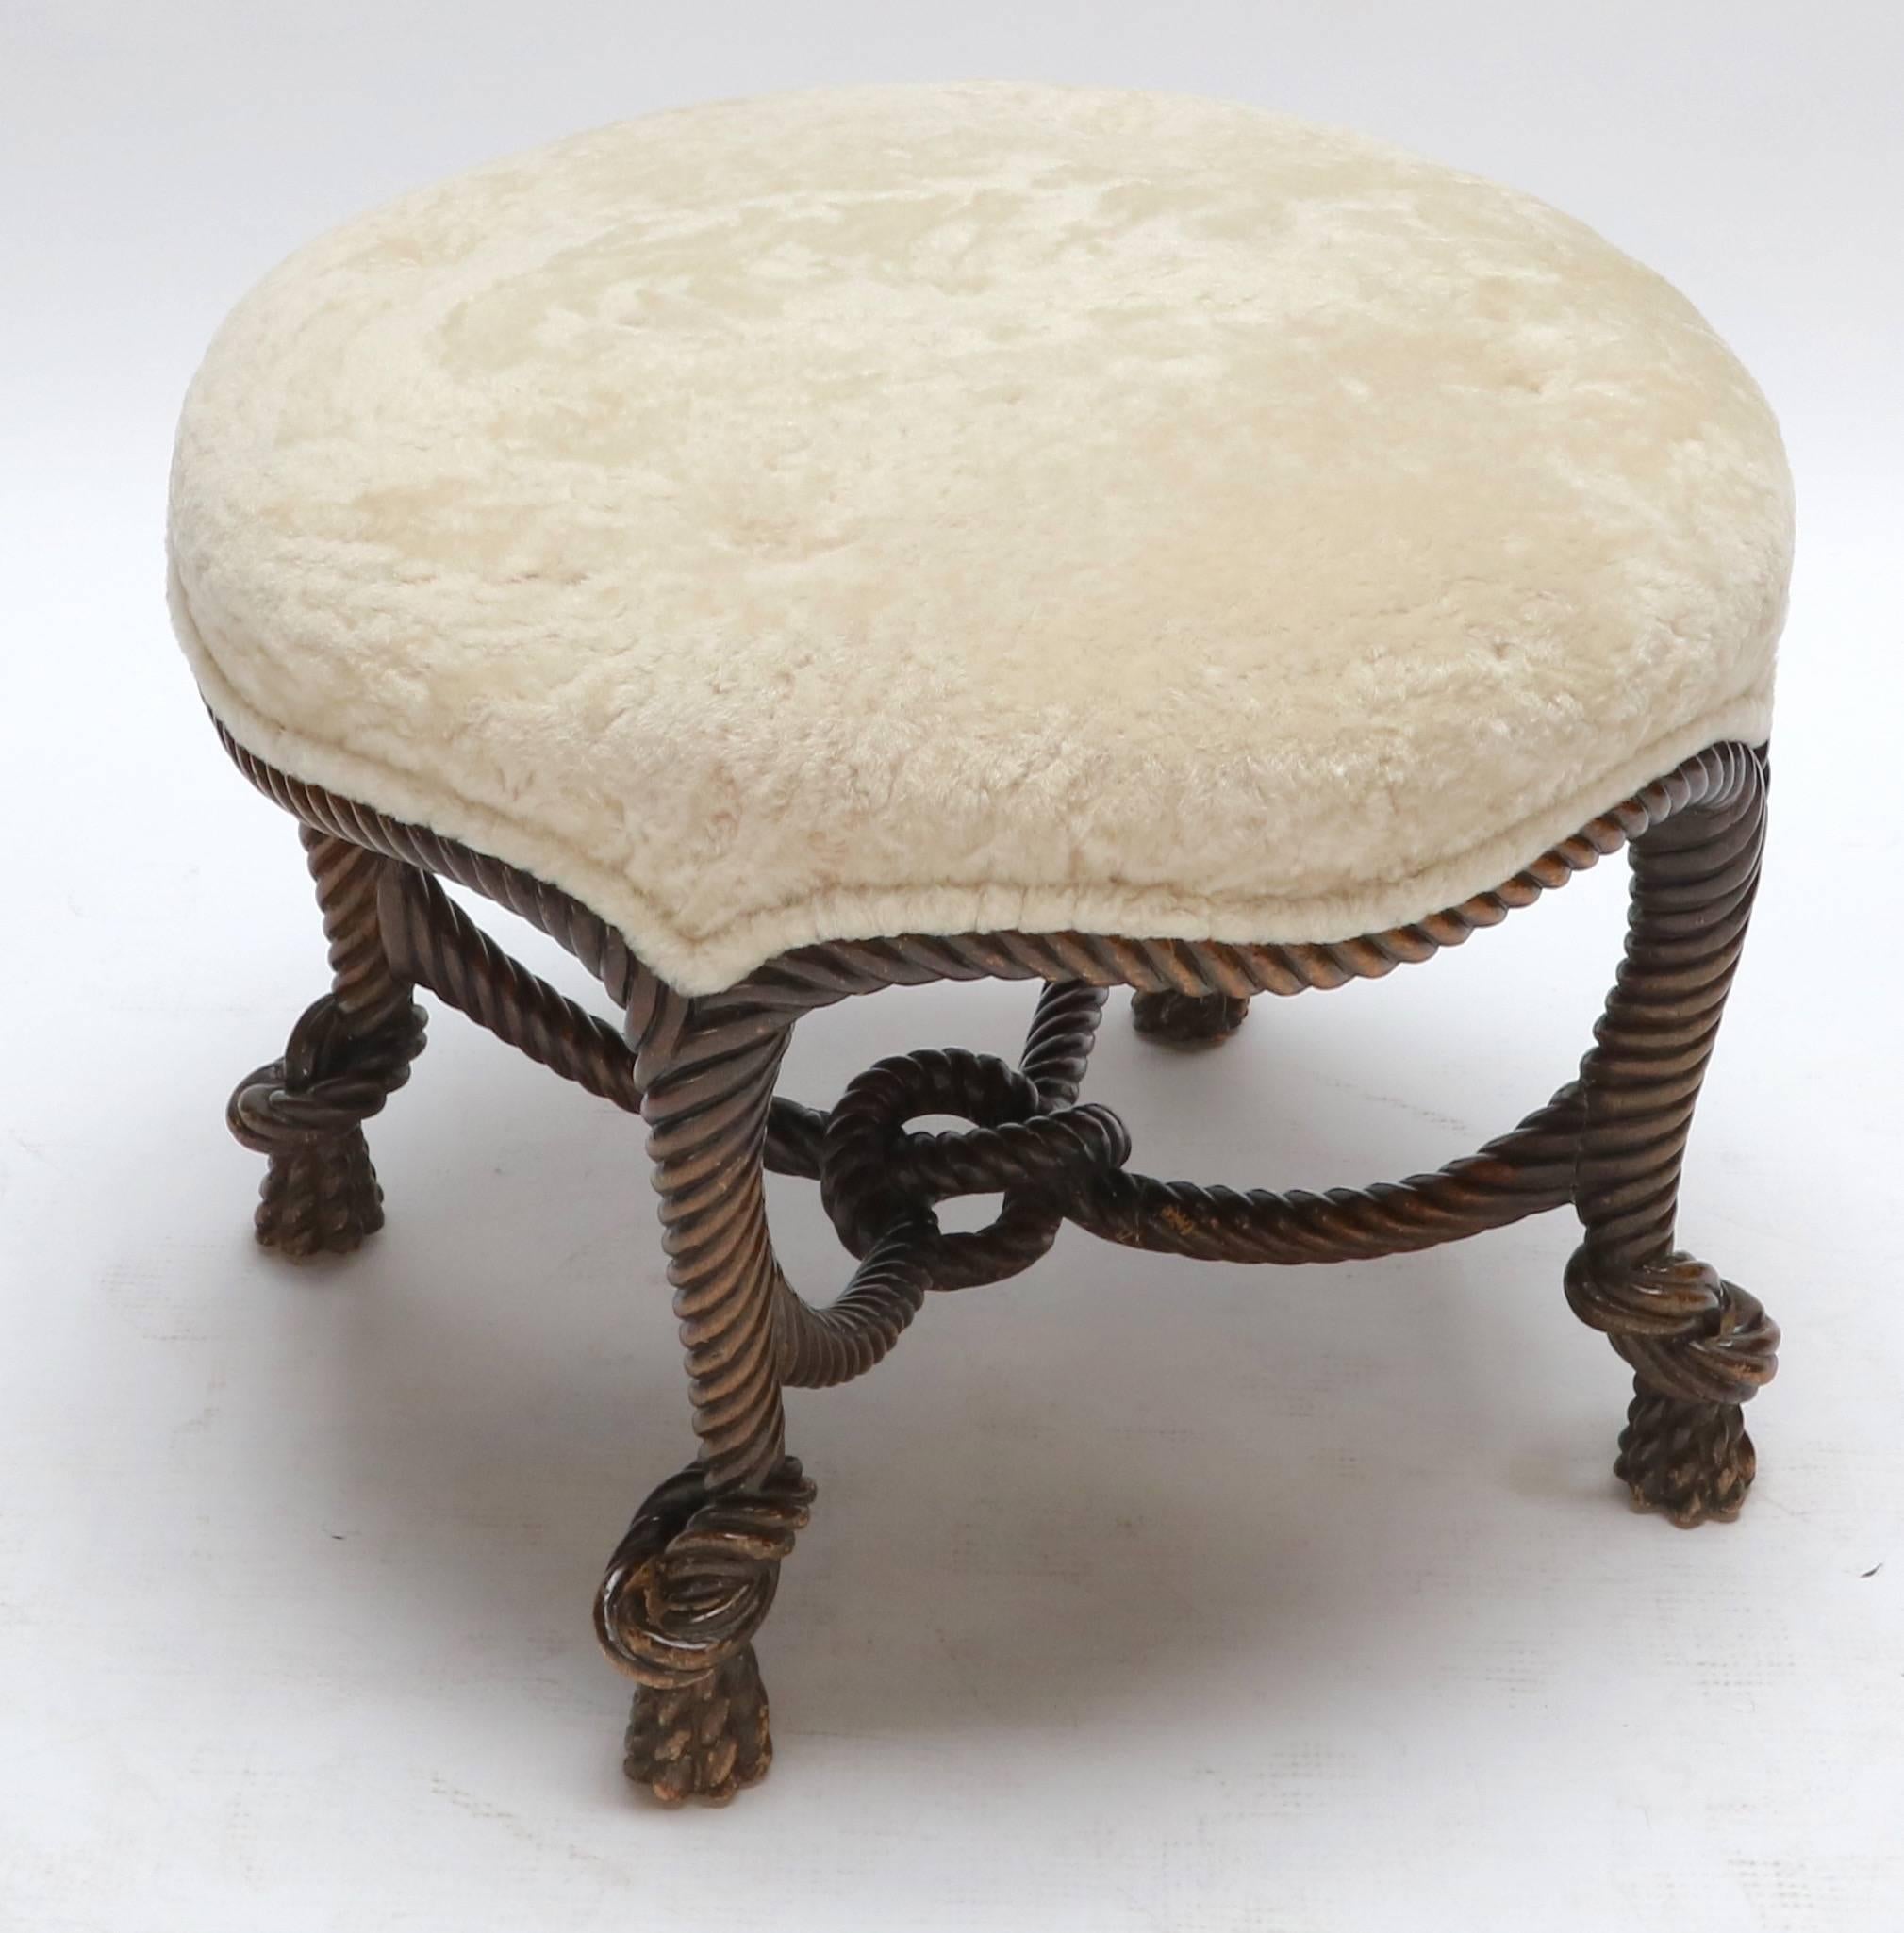 1940s, Italian carved wood ottoman upholstered in sheepskin with rope shaped legs and knot in the middle.